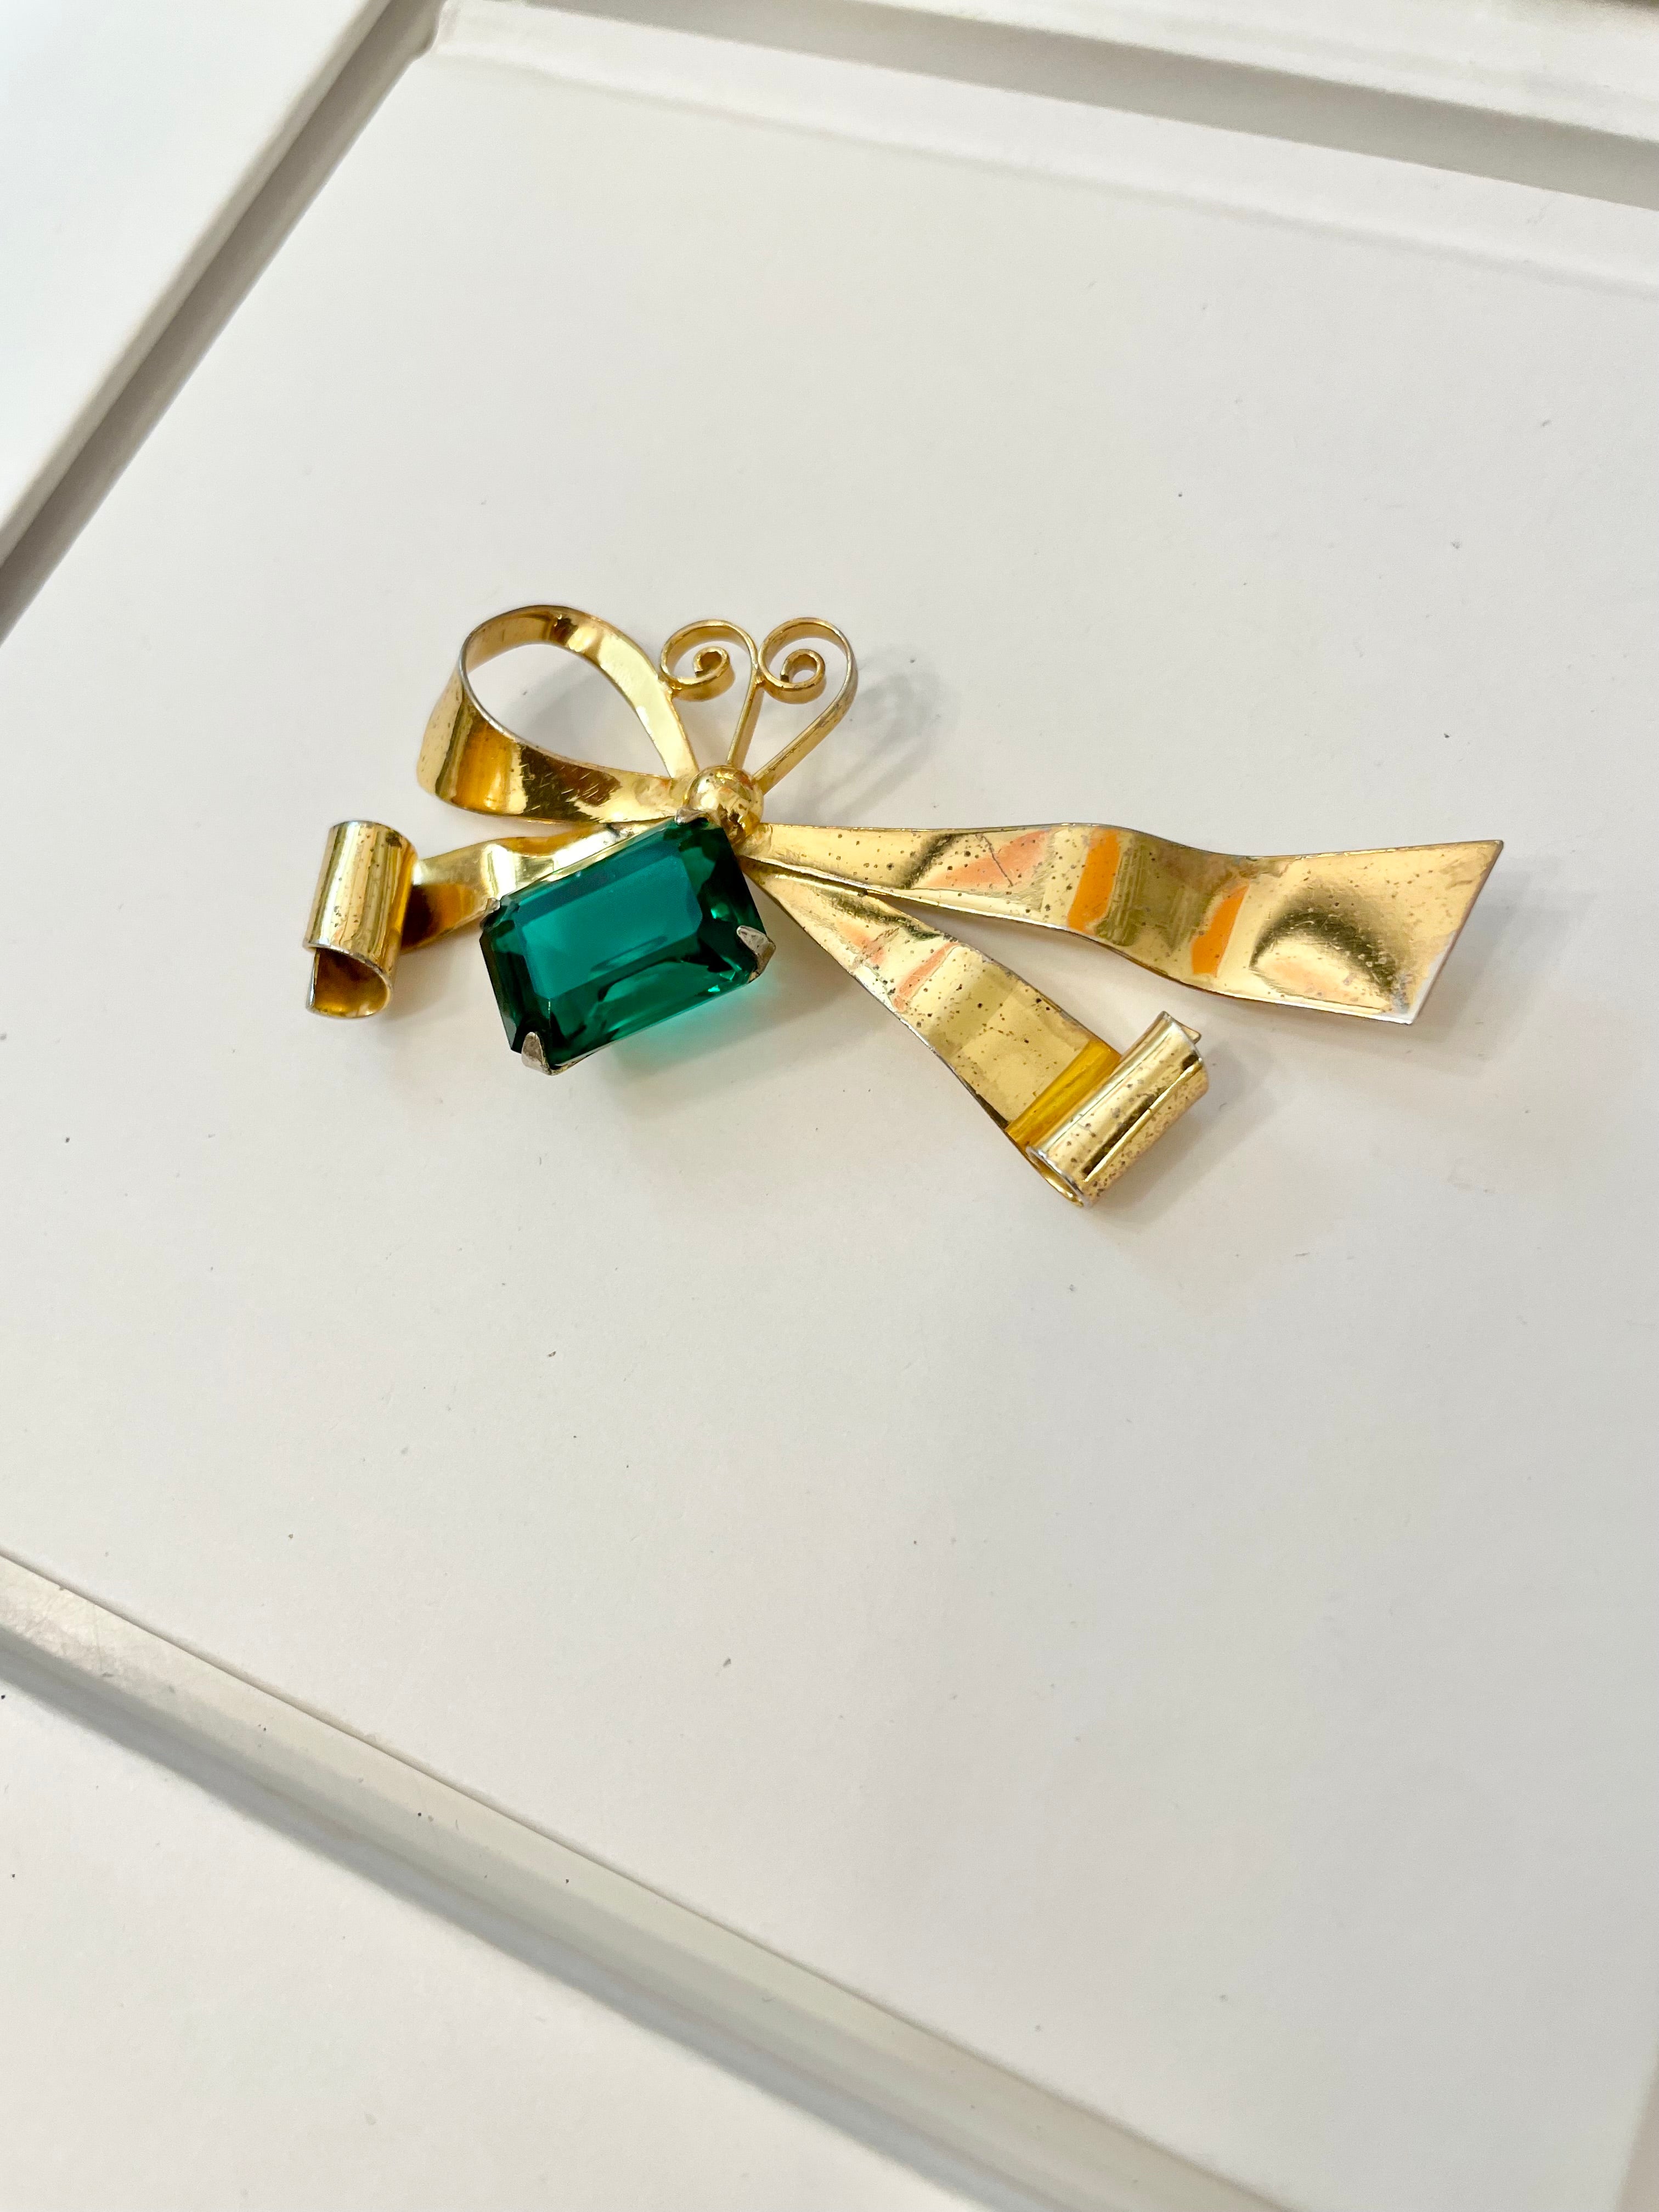 Absolutely stunning 1940's emerald glass chic brooch..... truly divine